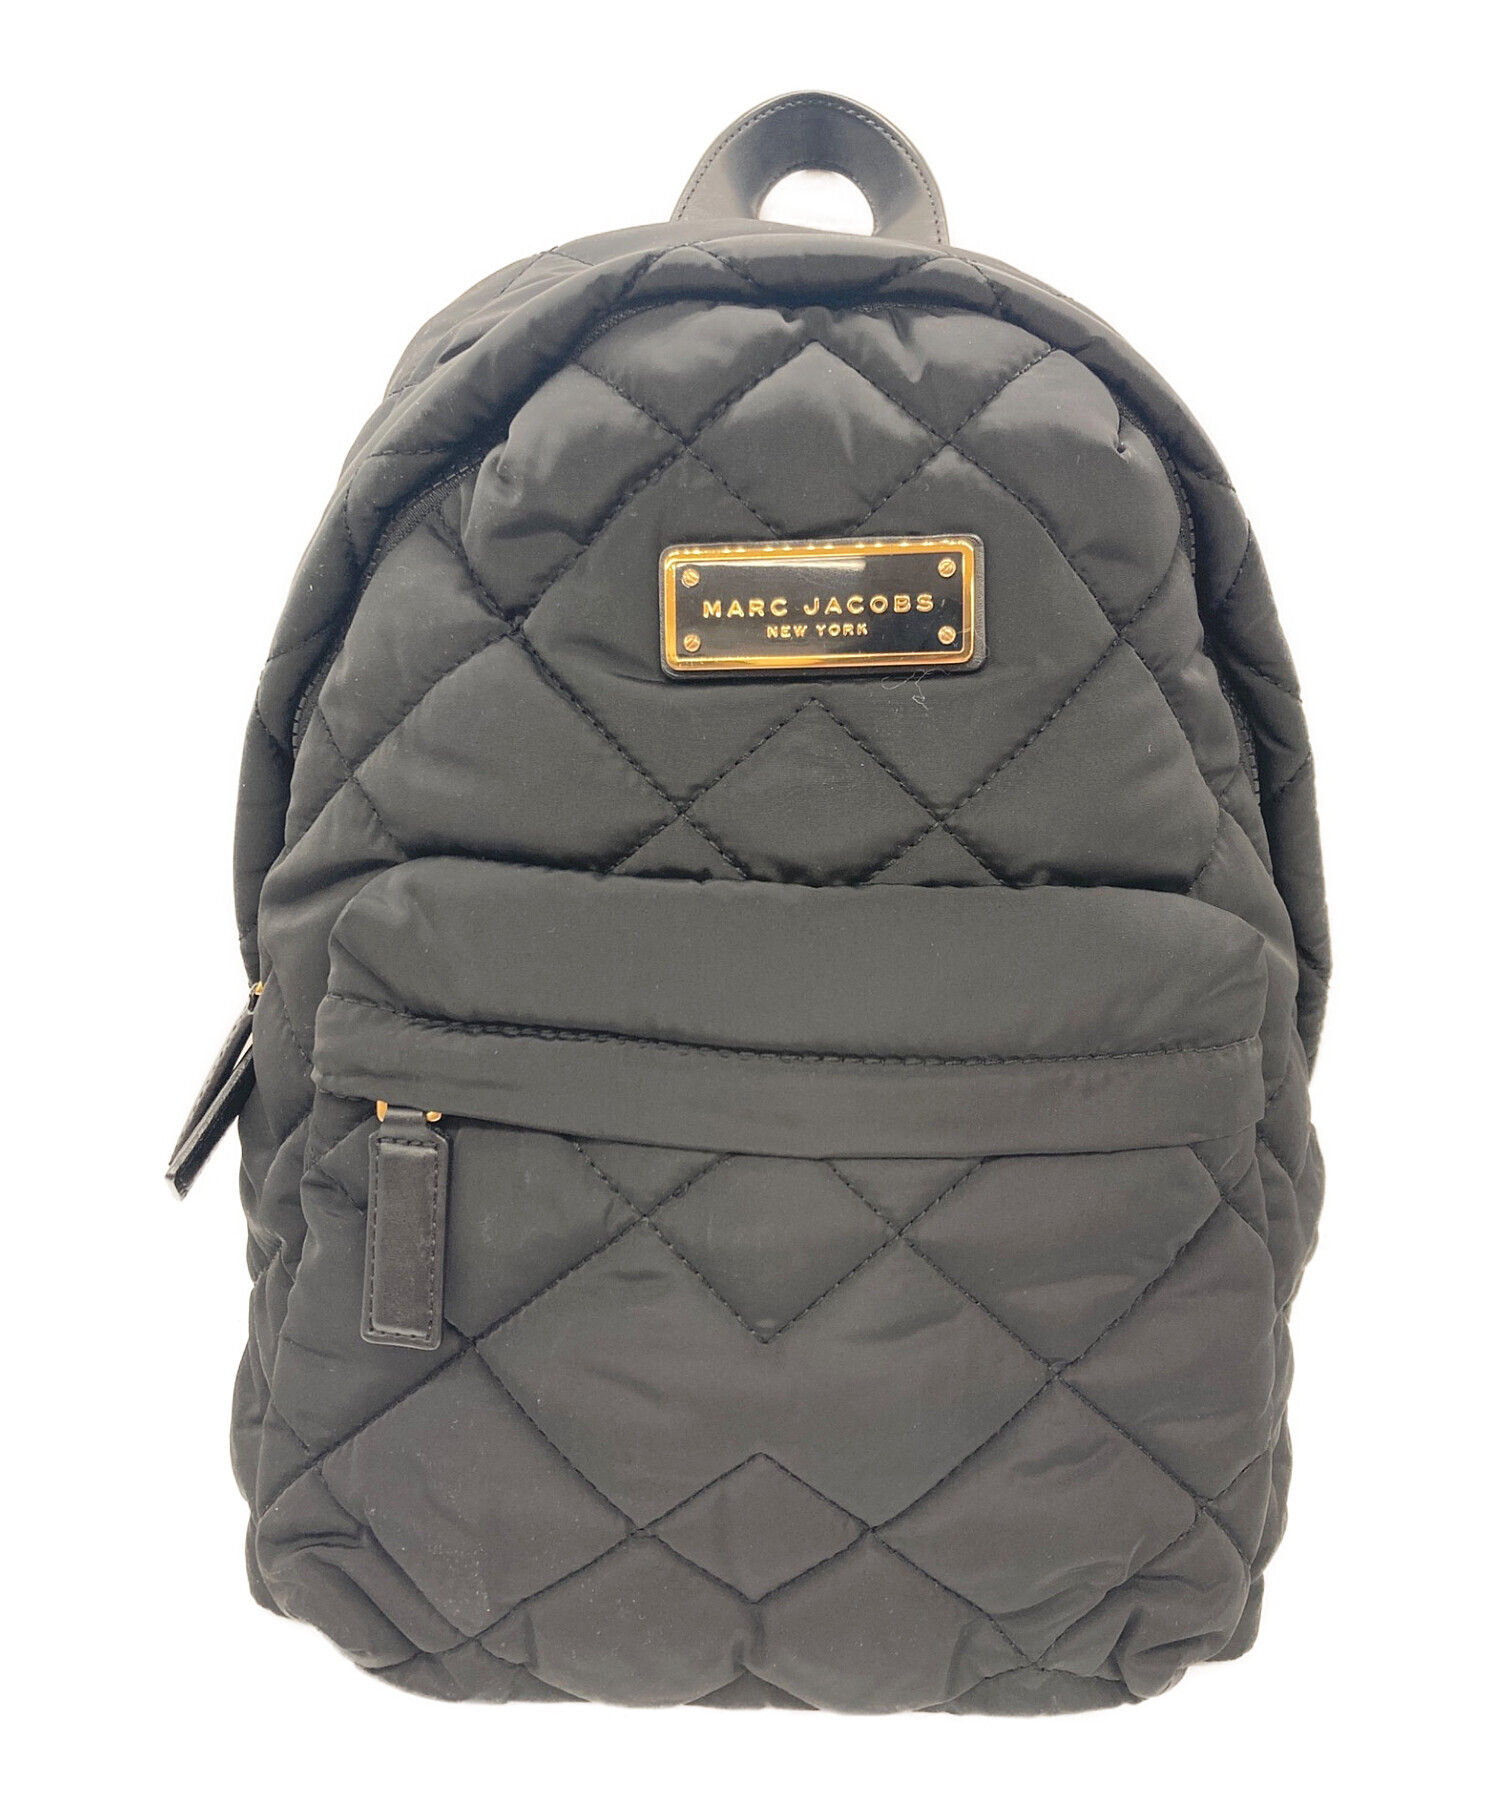 MARC JACOBS マークジェイコブス QUILTED BACKPACK - リュック/バック